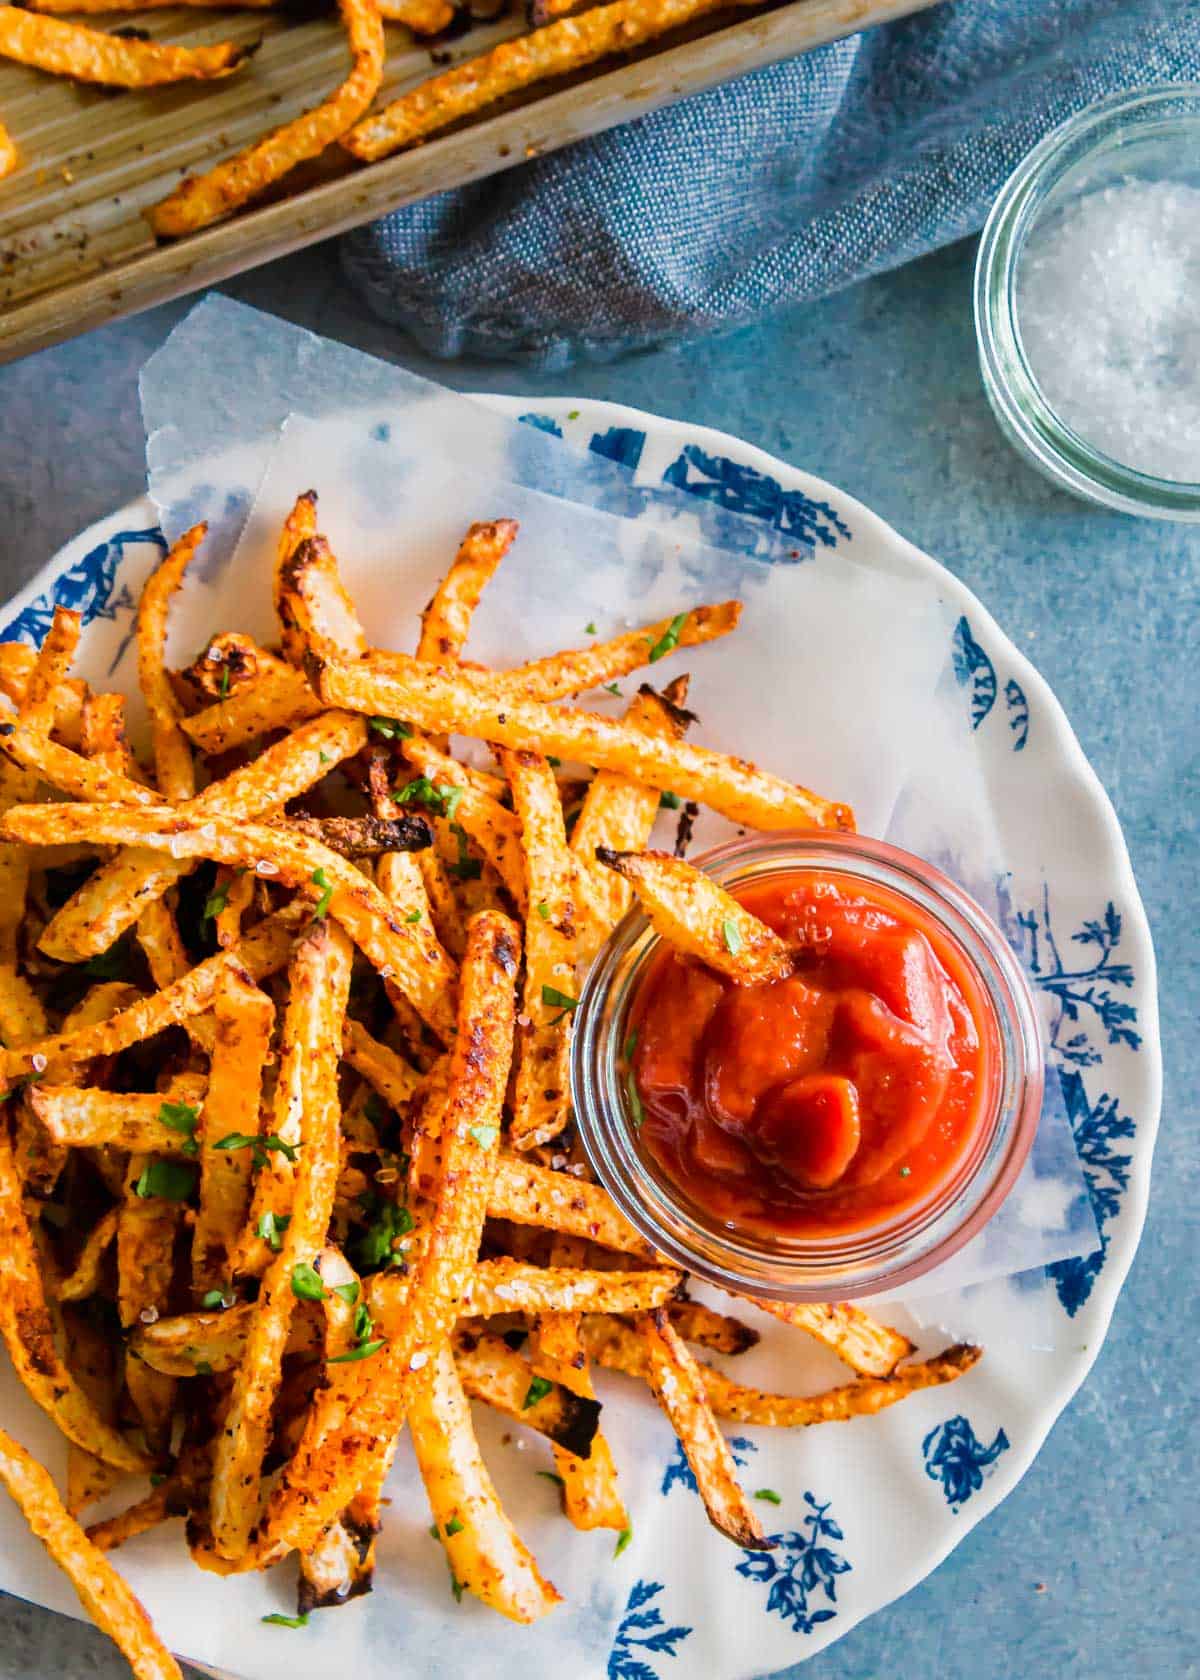 These baked jicama fries can be made right in the oven, no need for frying to get the perfect crispy texture.